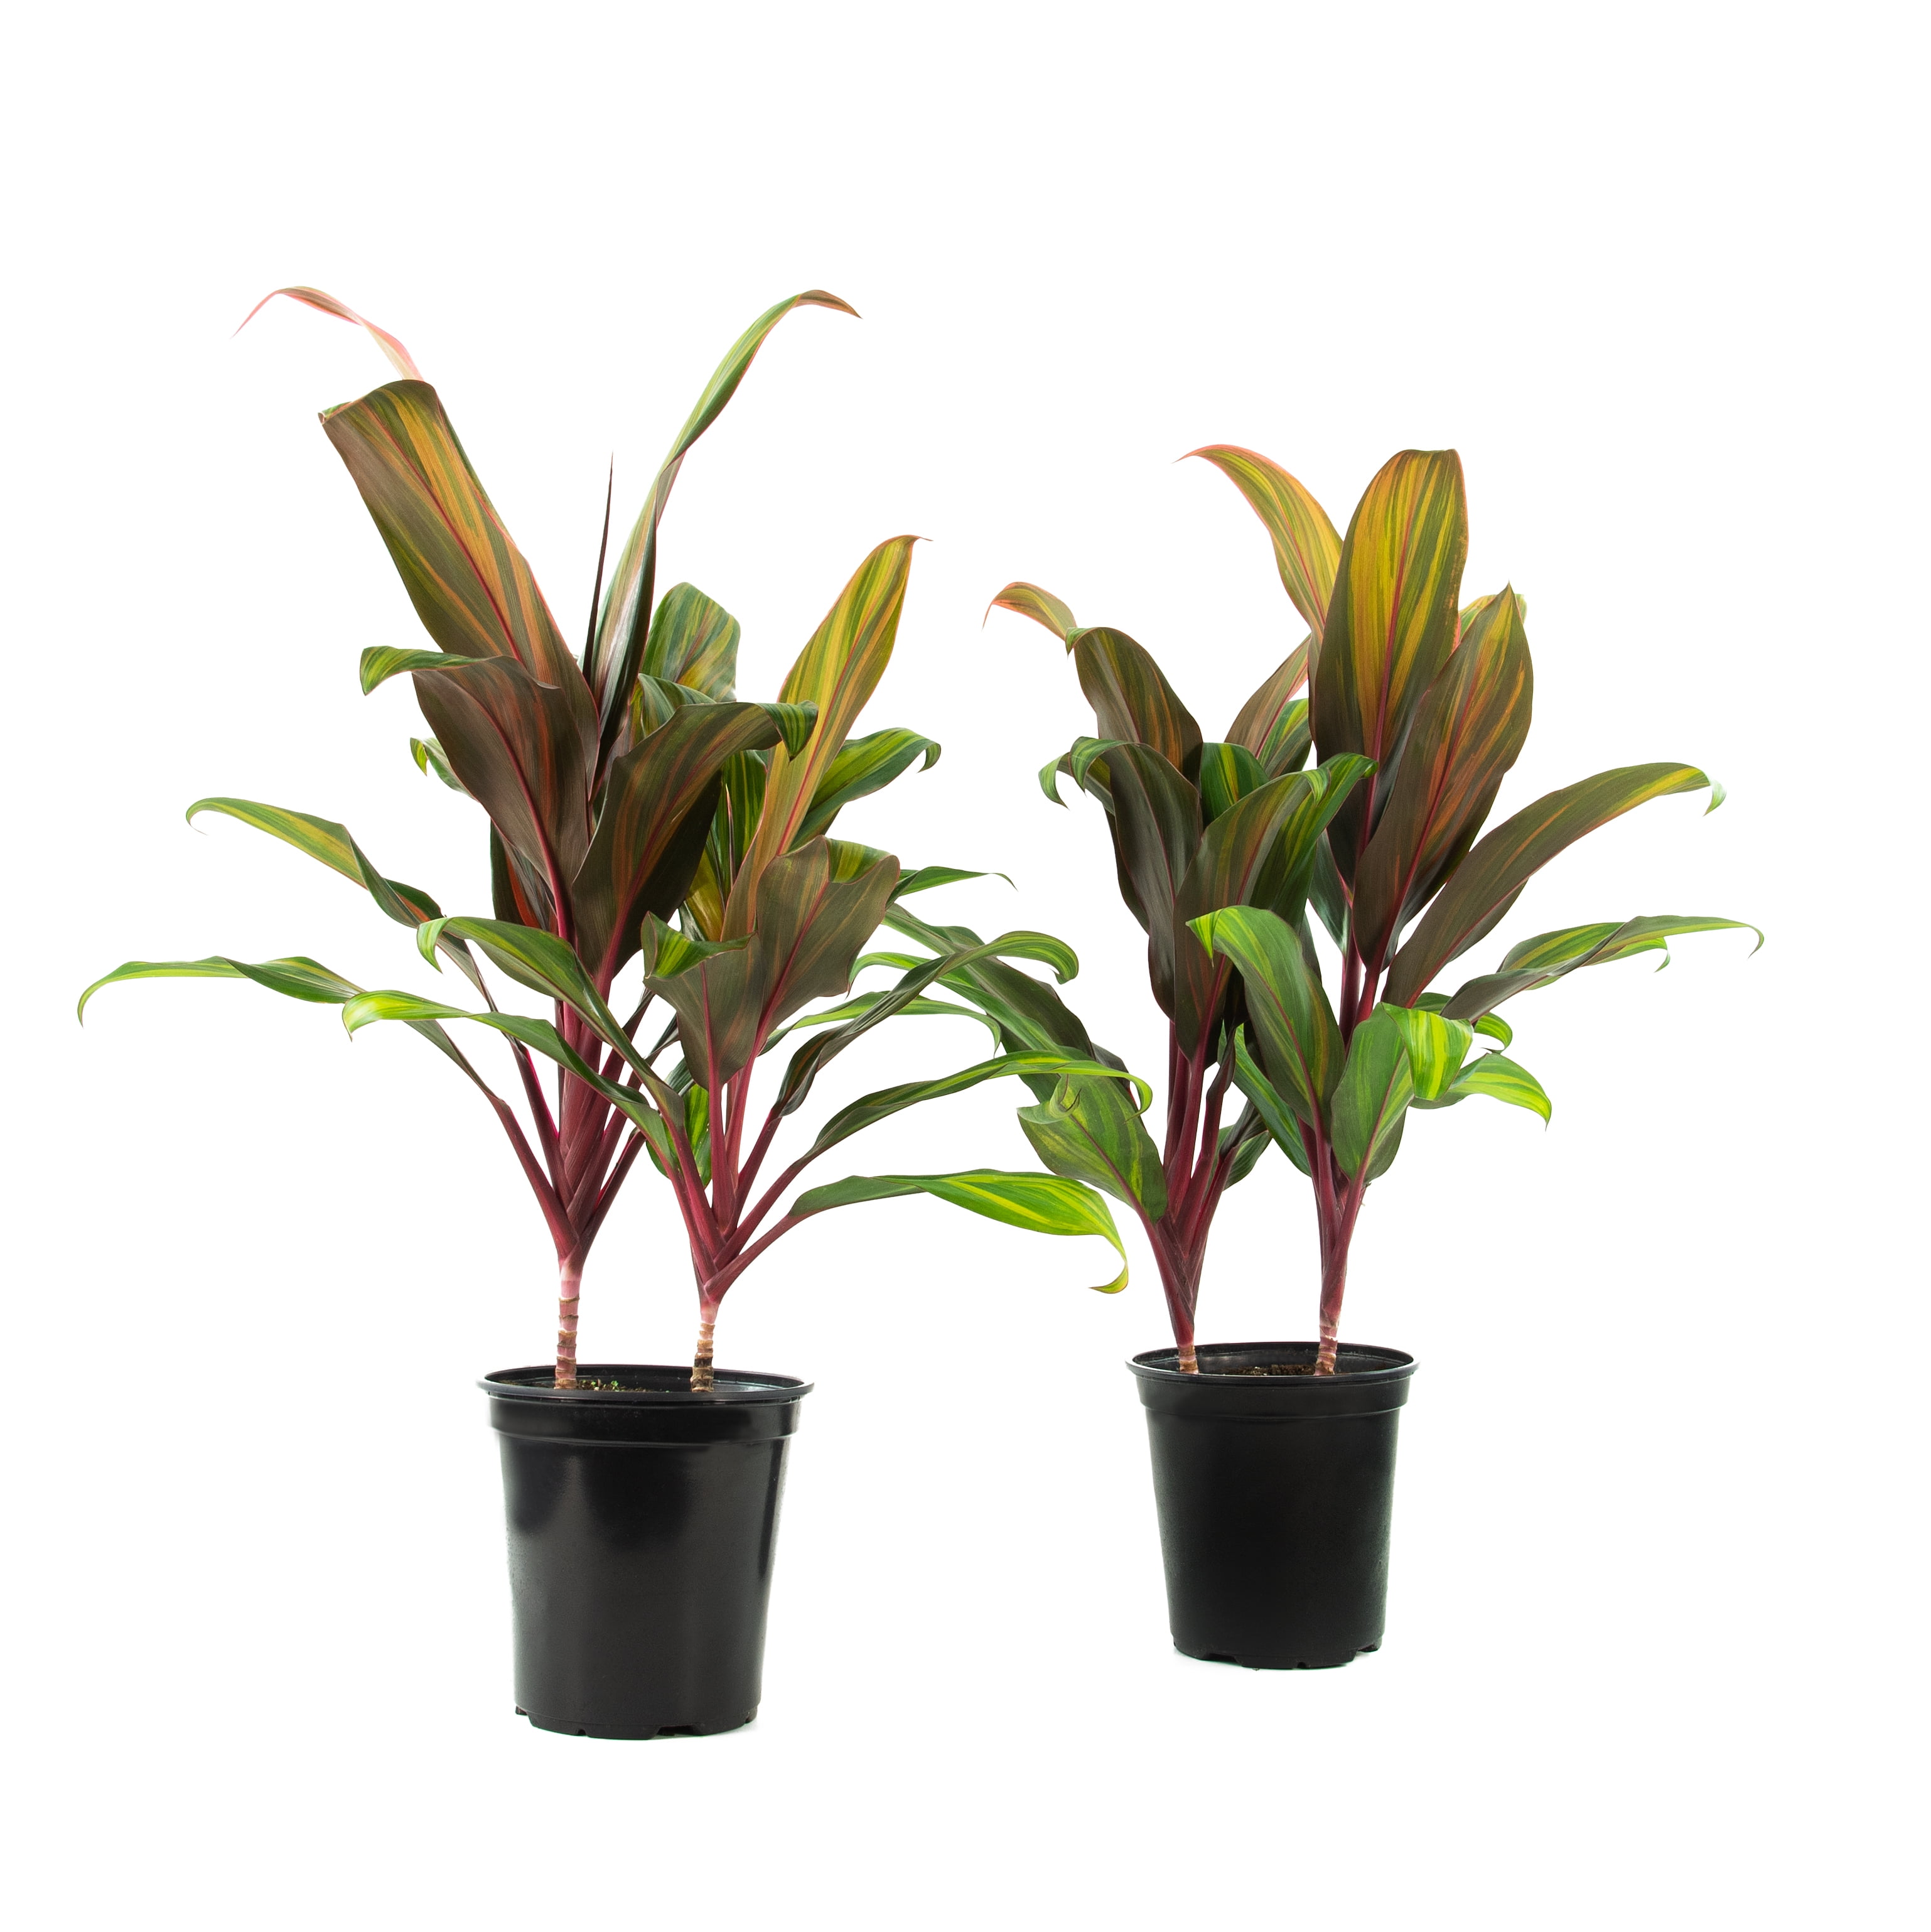 6 in Cordyline Harlequin Live Houseplant with Bright Indirect Sun- 2 Piece 